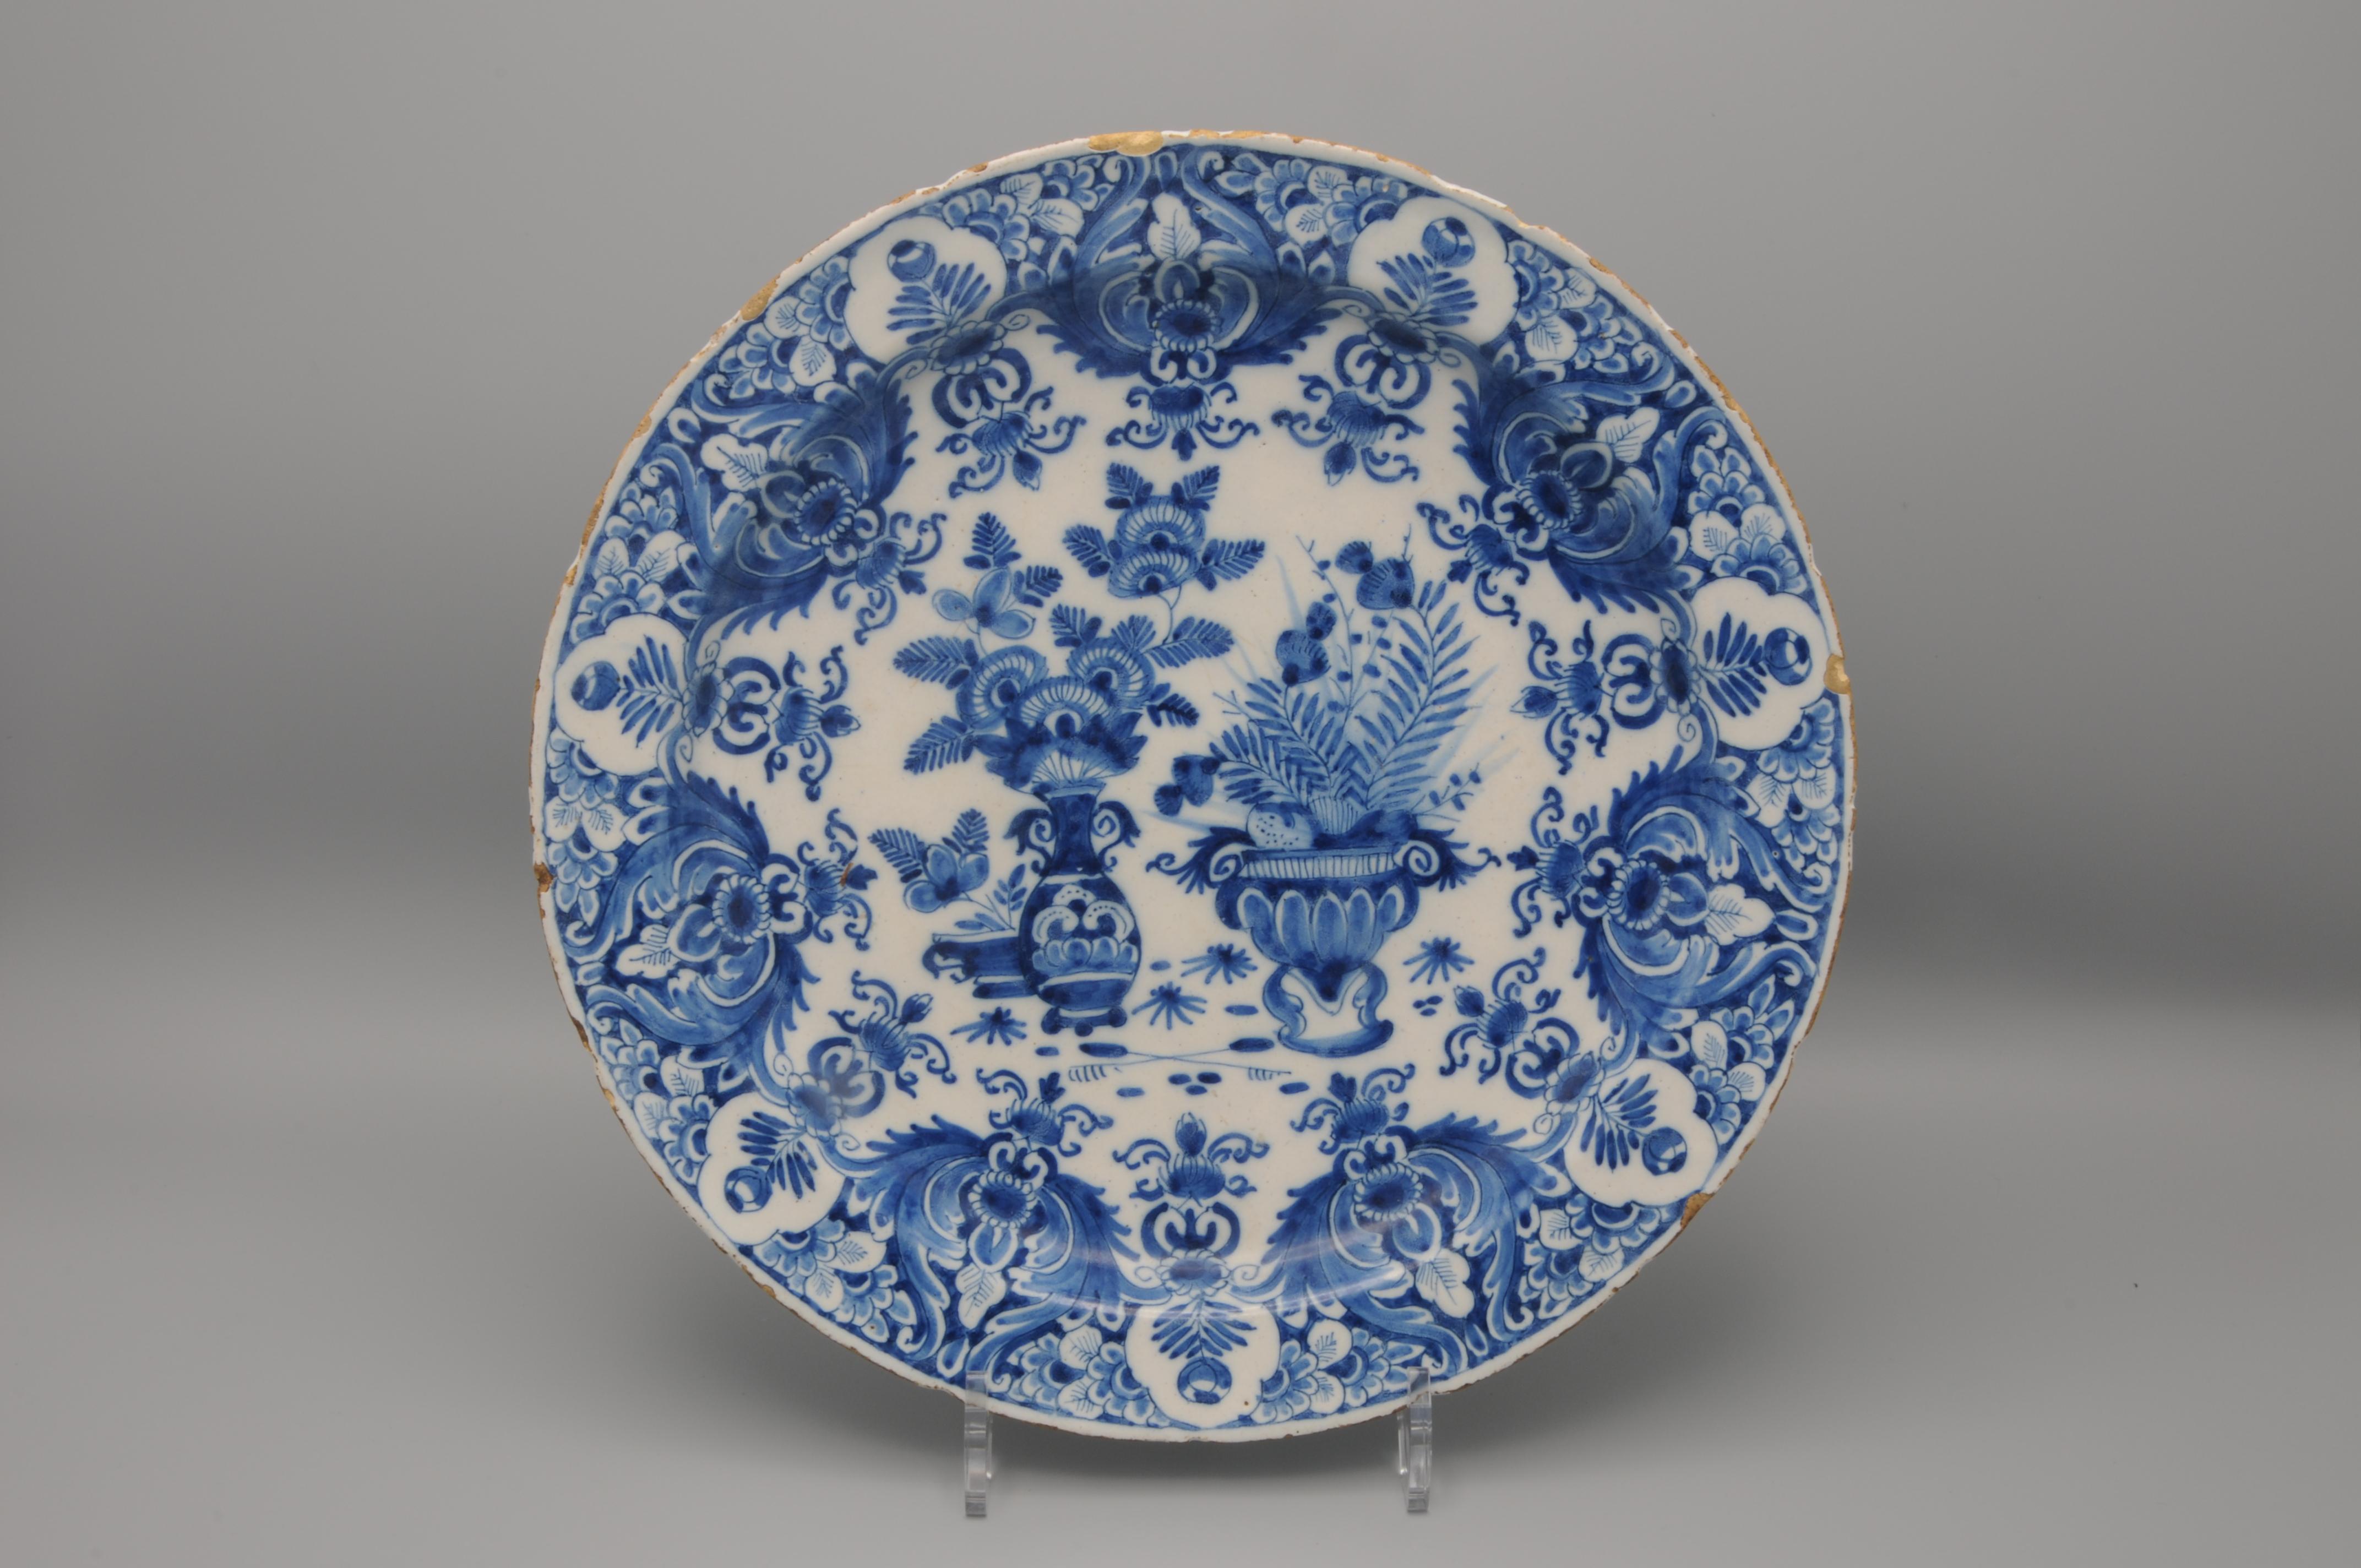 Rare early 18th century Blue Delftware plate with elaborate chinoiserie decoration of three flower baskets. Beautiful border decoration of rich foliage, flowers and scrollwork. 

Marked 'De witte Starre', active from 1660 - 1804